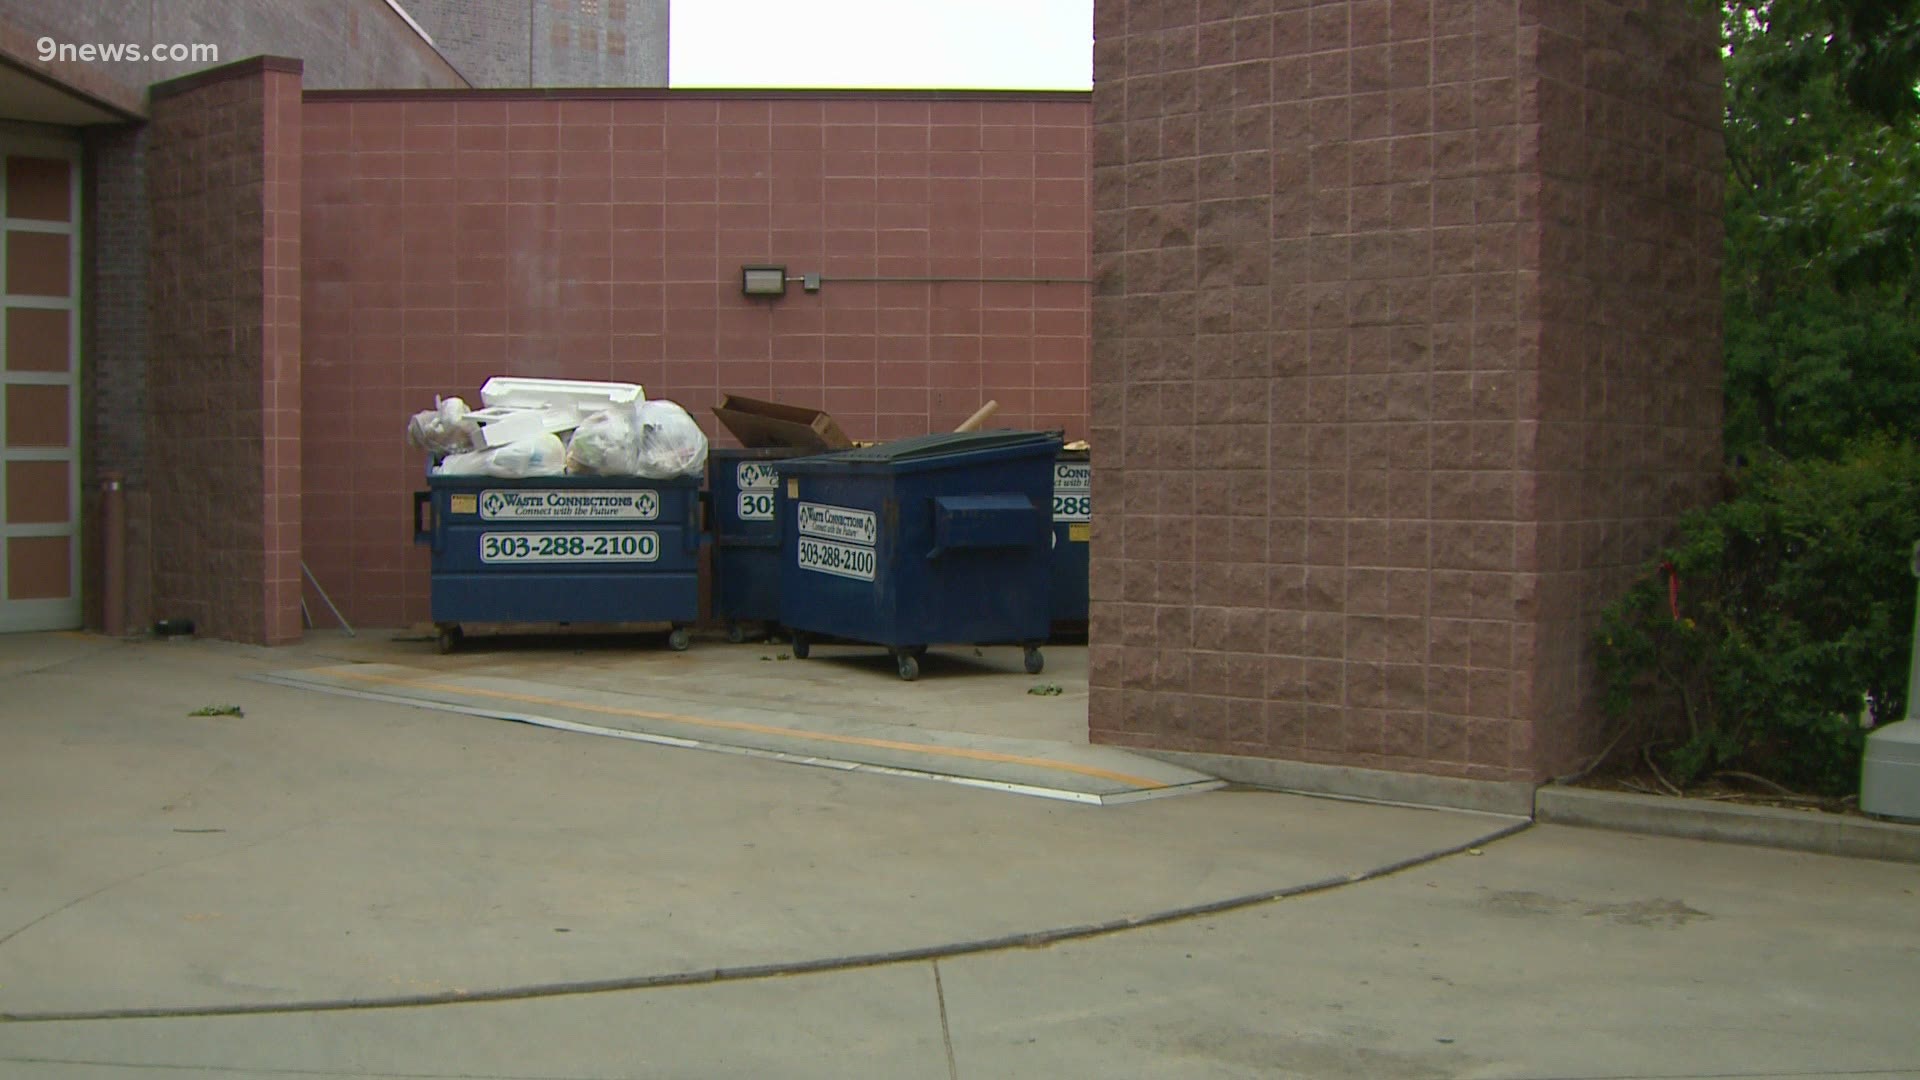 The city received more than 1,700 calls in June about trash that wasn't picked up in time.